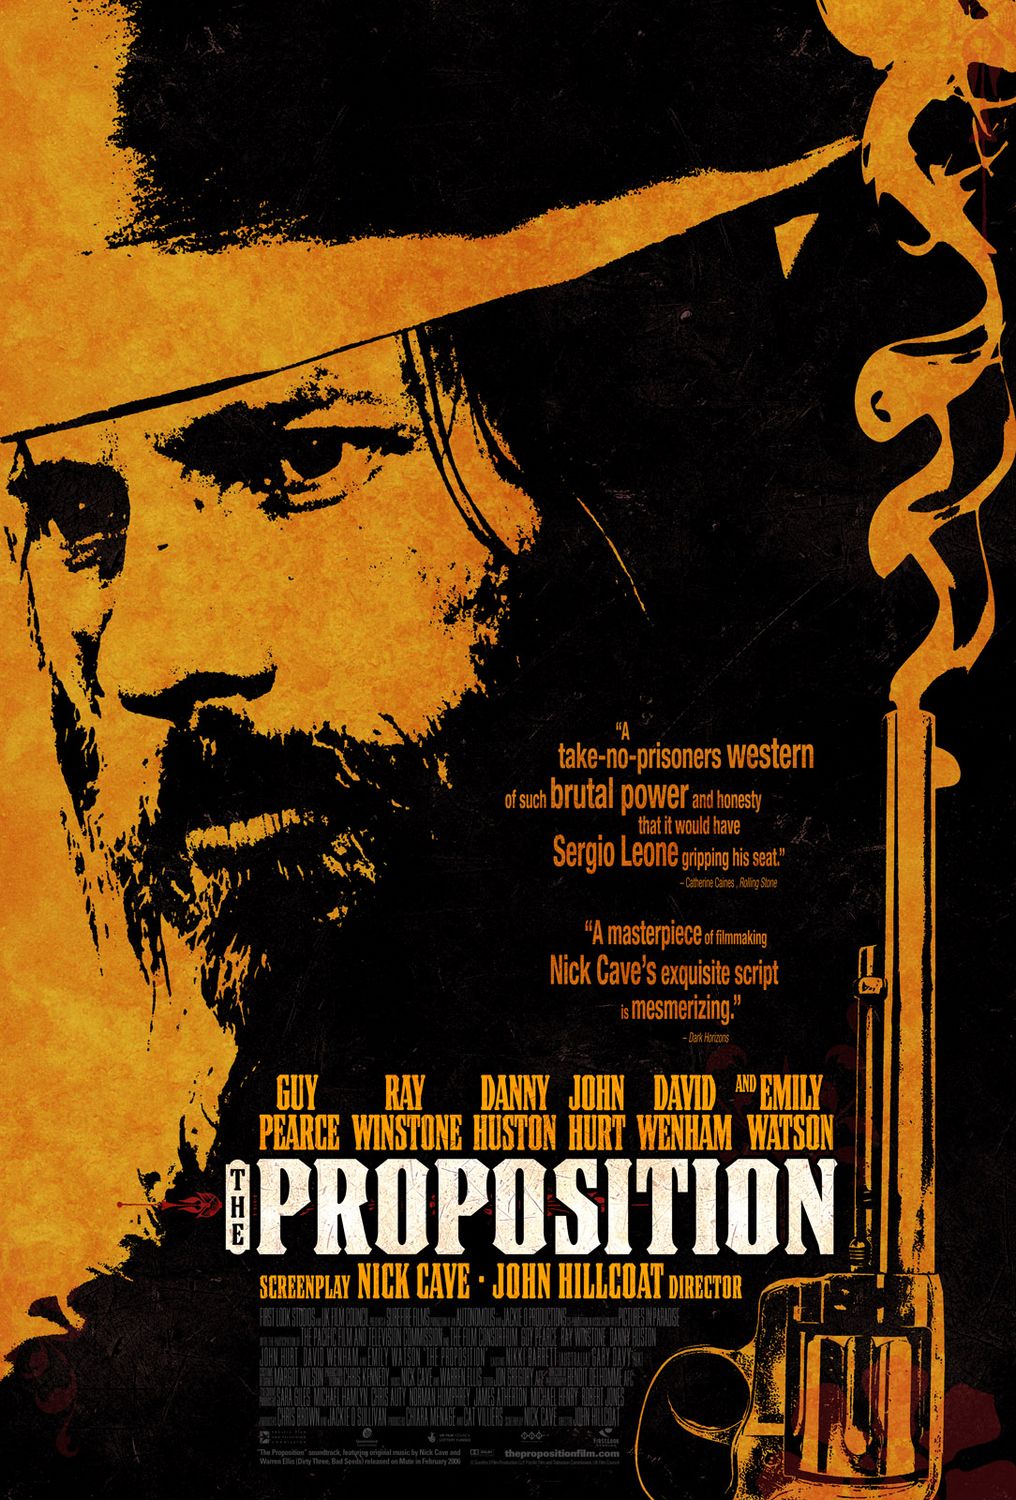 PROPOSITION, THE